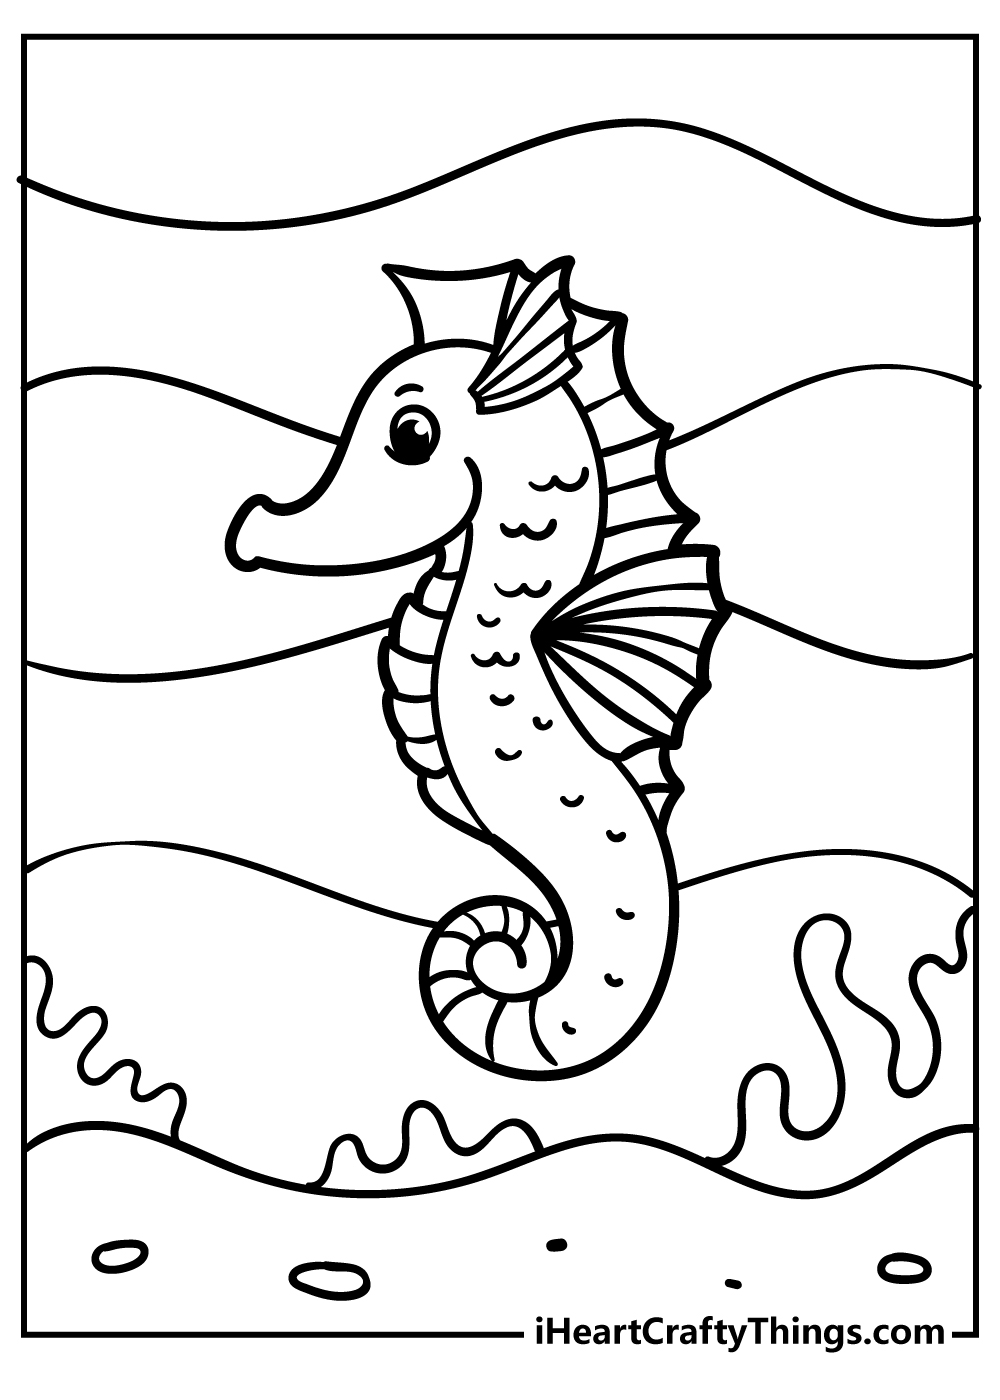 Sea Creature Coloring Book for kids free printable